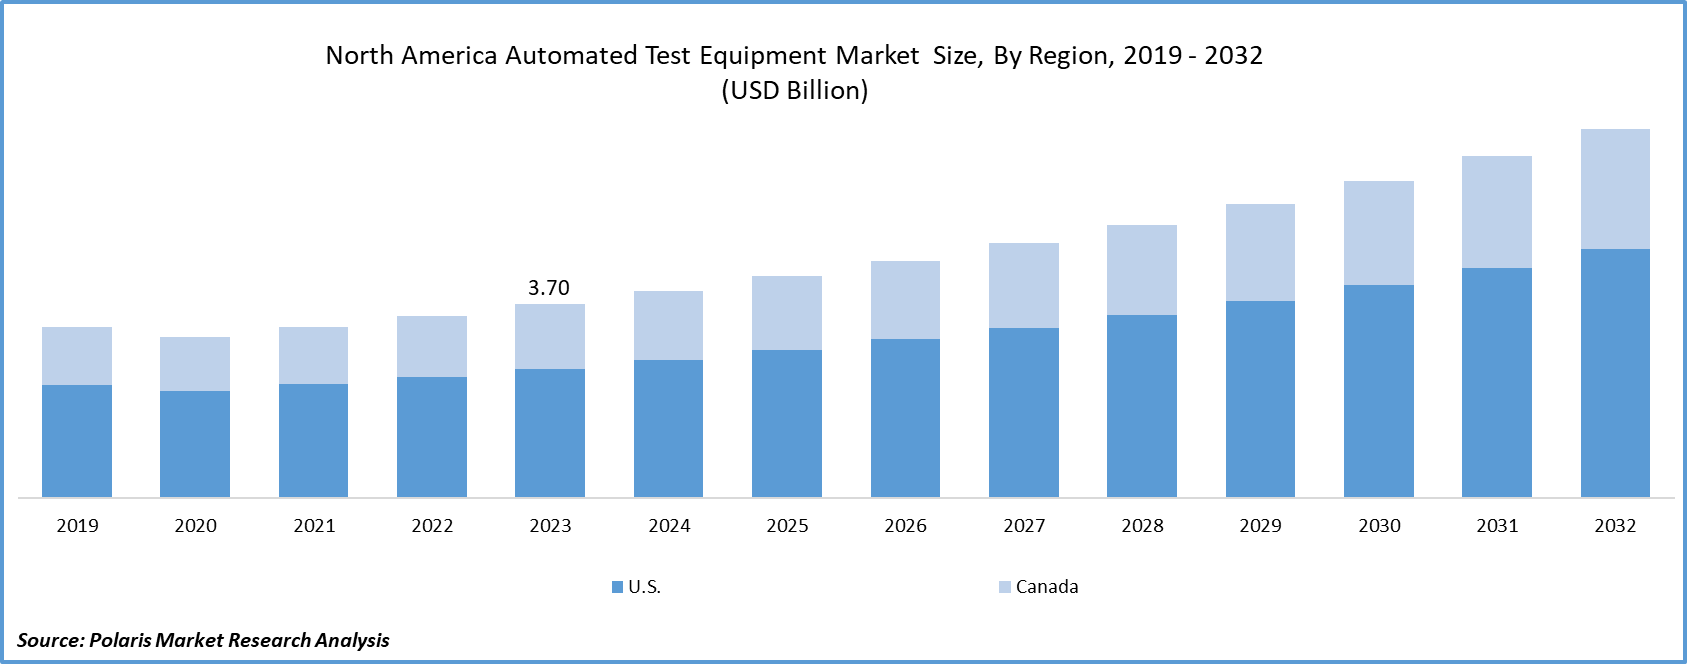 North America Automated Test Equipment Market Size